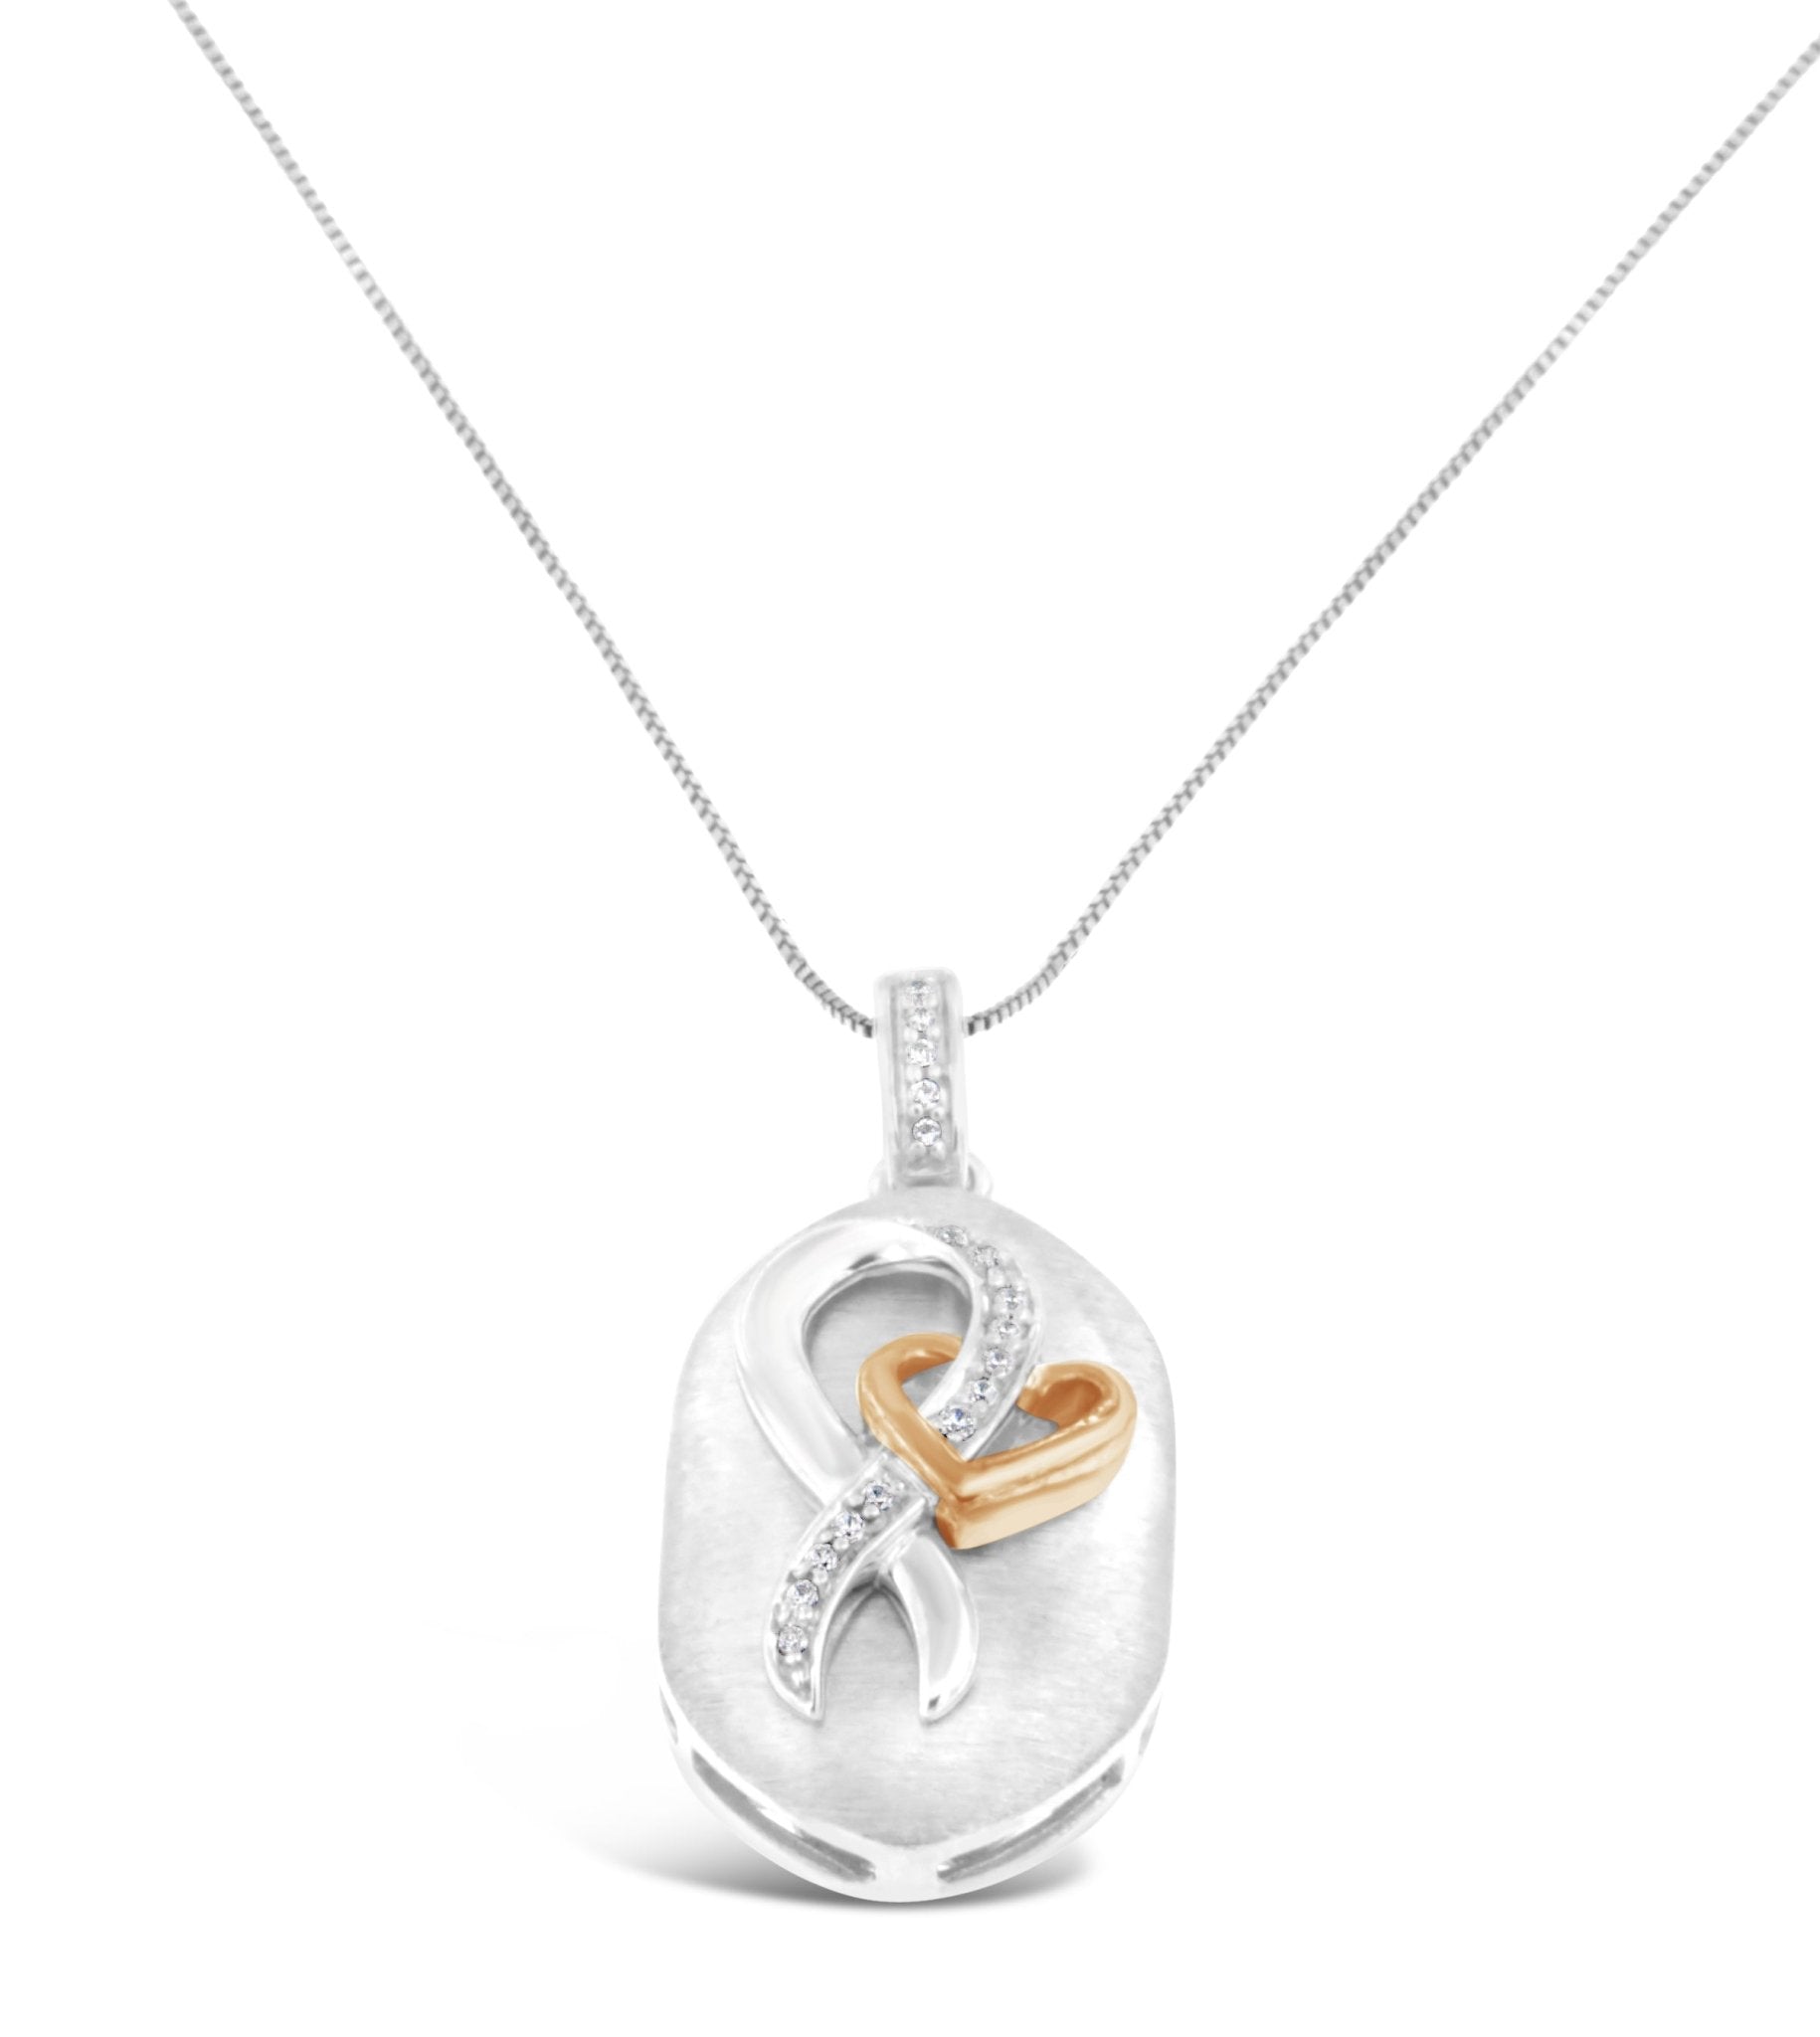 10k Rose Gold and Sterling Silver 1/10ct TDW Round Cut Diamond Interlocked Heart and Ribbon Pendant Necklace (H-I, I1-I2) - LinkagejewelrydesignLinkagejewelrydesign